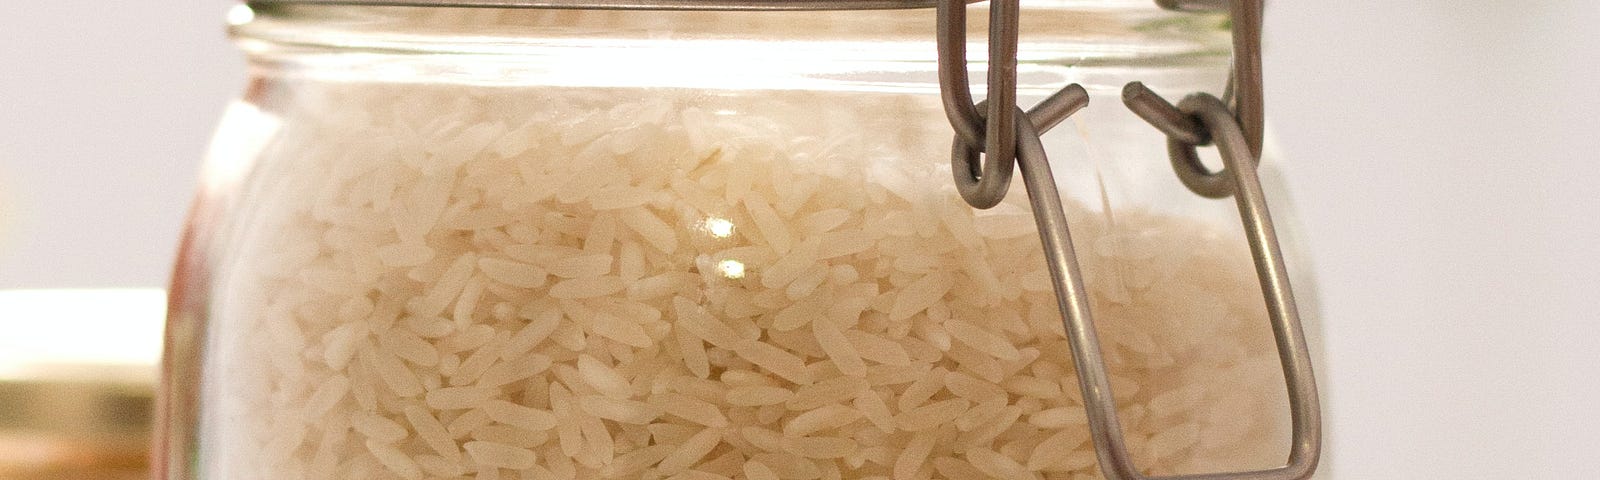 How to Make Perfect White Rice in 8 Easy Steps